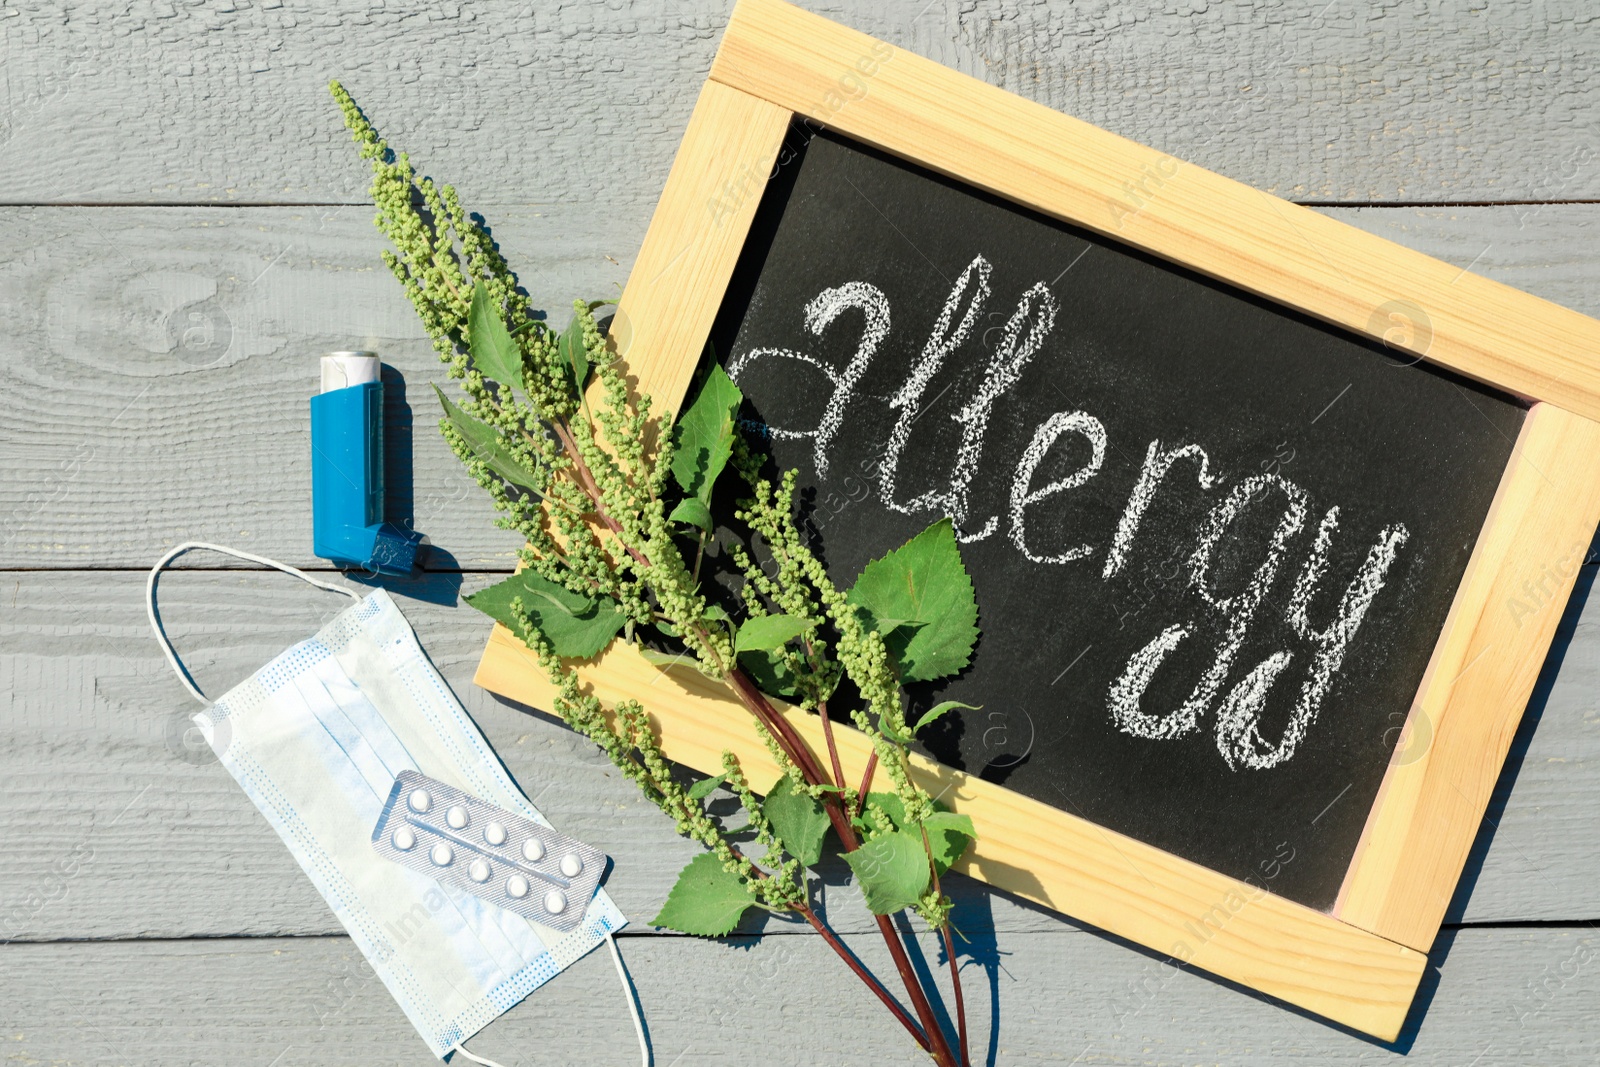 Photo of Ragweed plant (Ambrosia genus) medication and chalkboard with word "ALLERGY" on light wooden background, flat lay